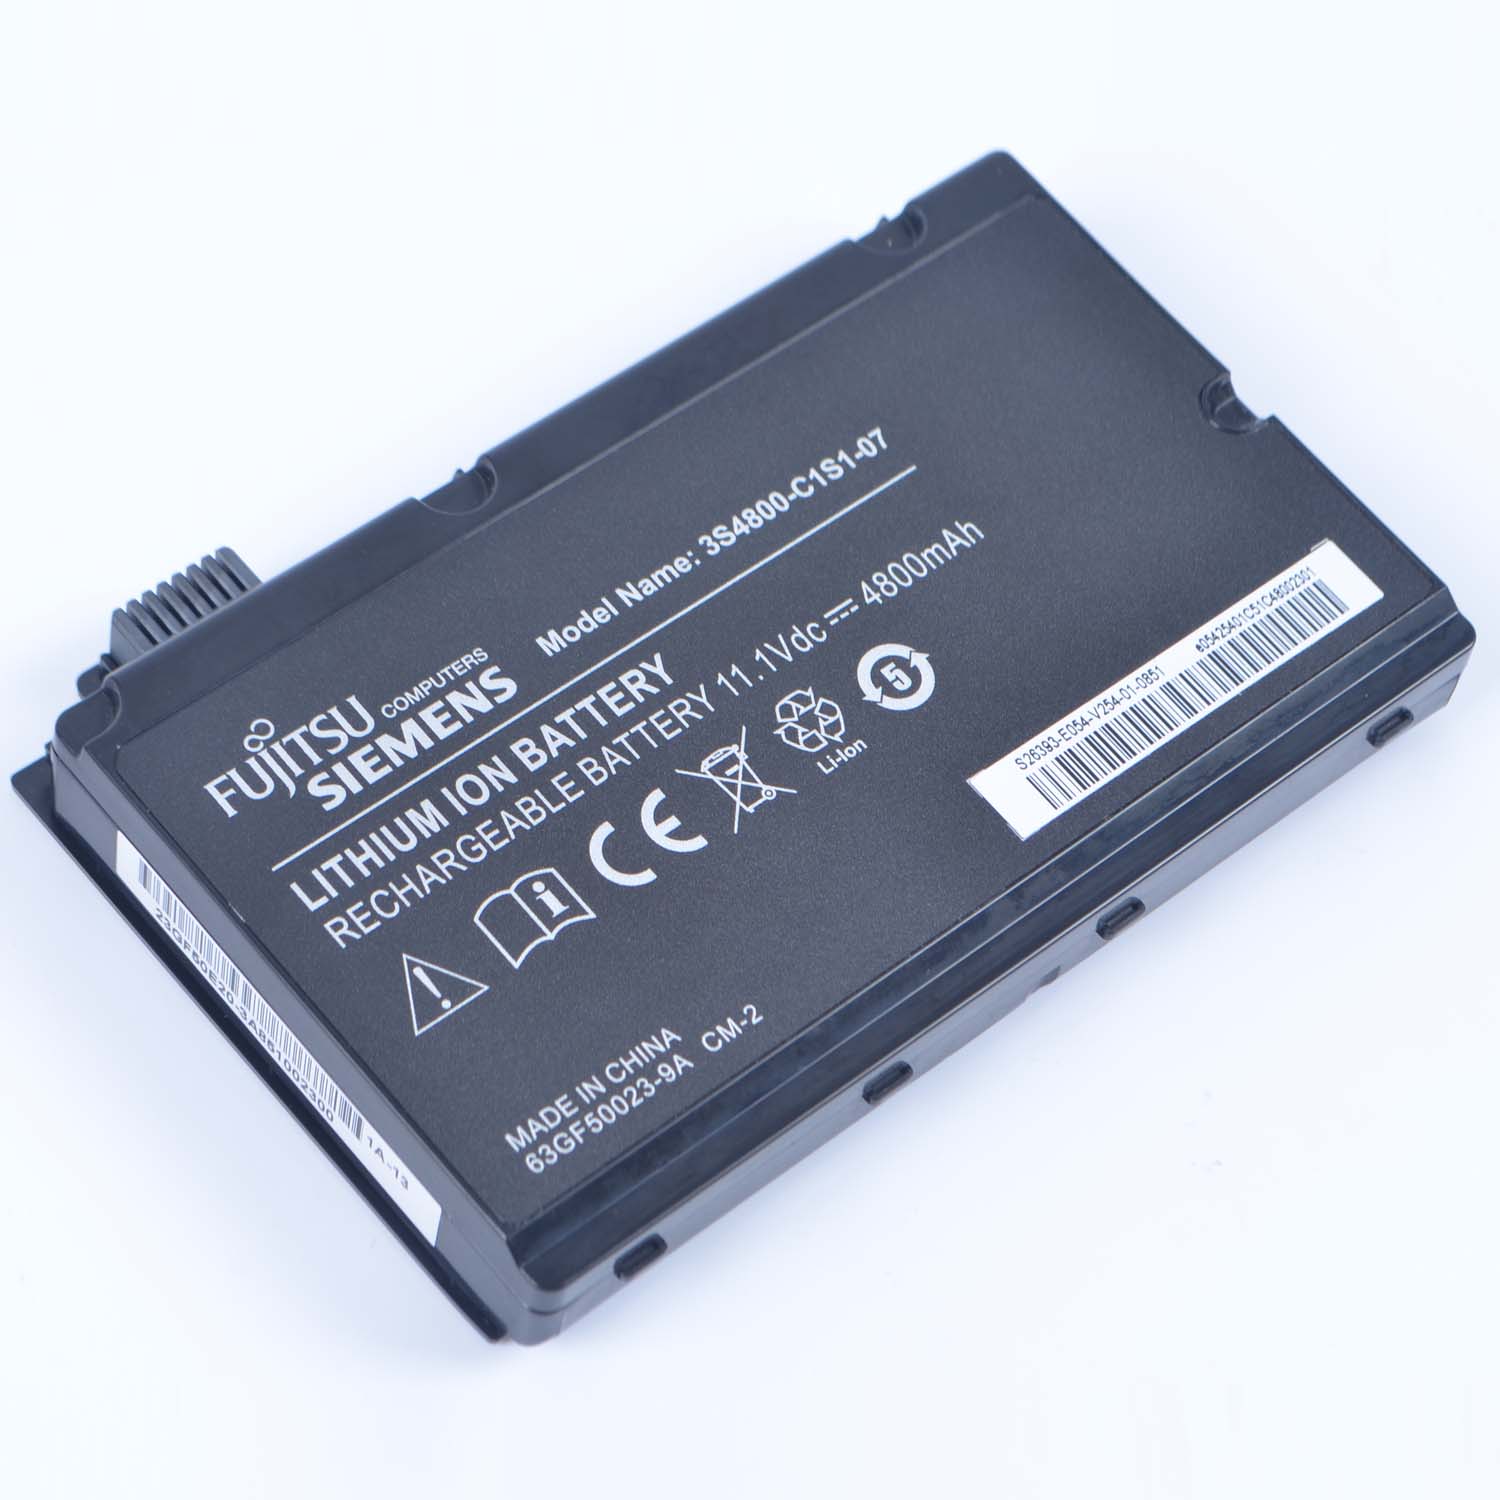 Replacement Battery for FUJITSU S26393-E010-V224-01-0803 battery